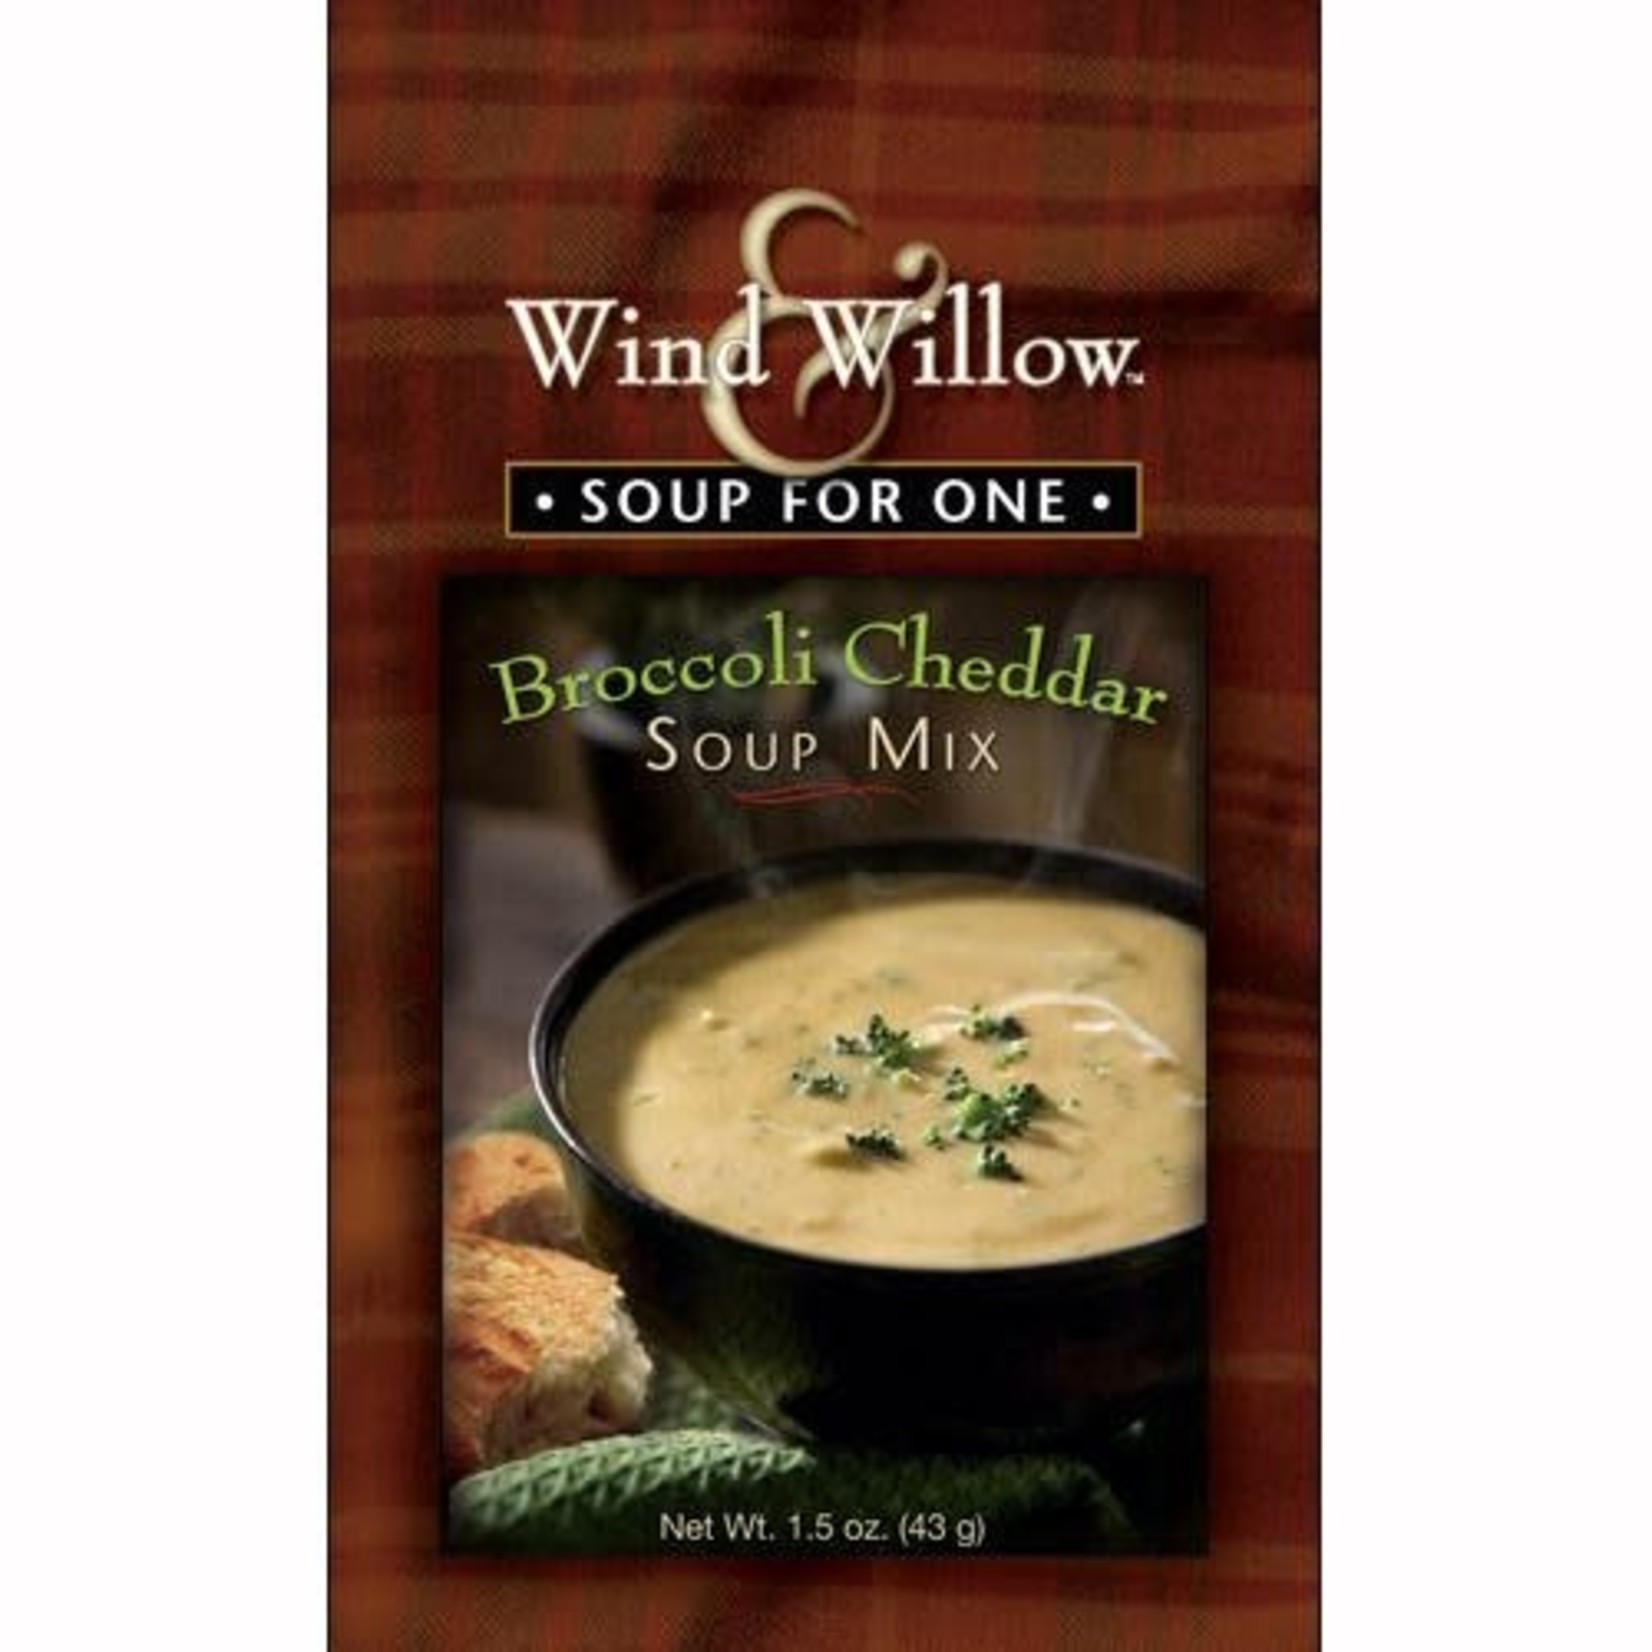 Wind & Willow One Cup Soup Mix